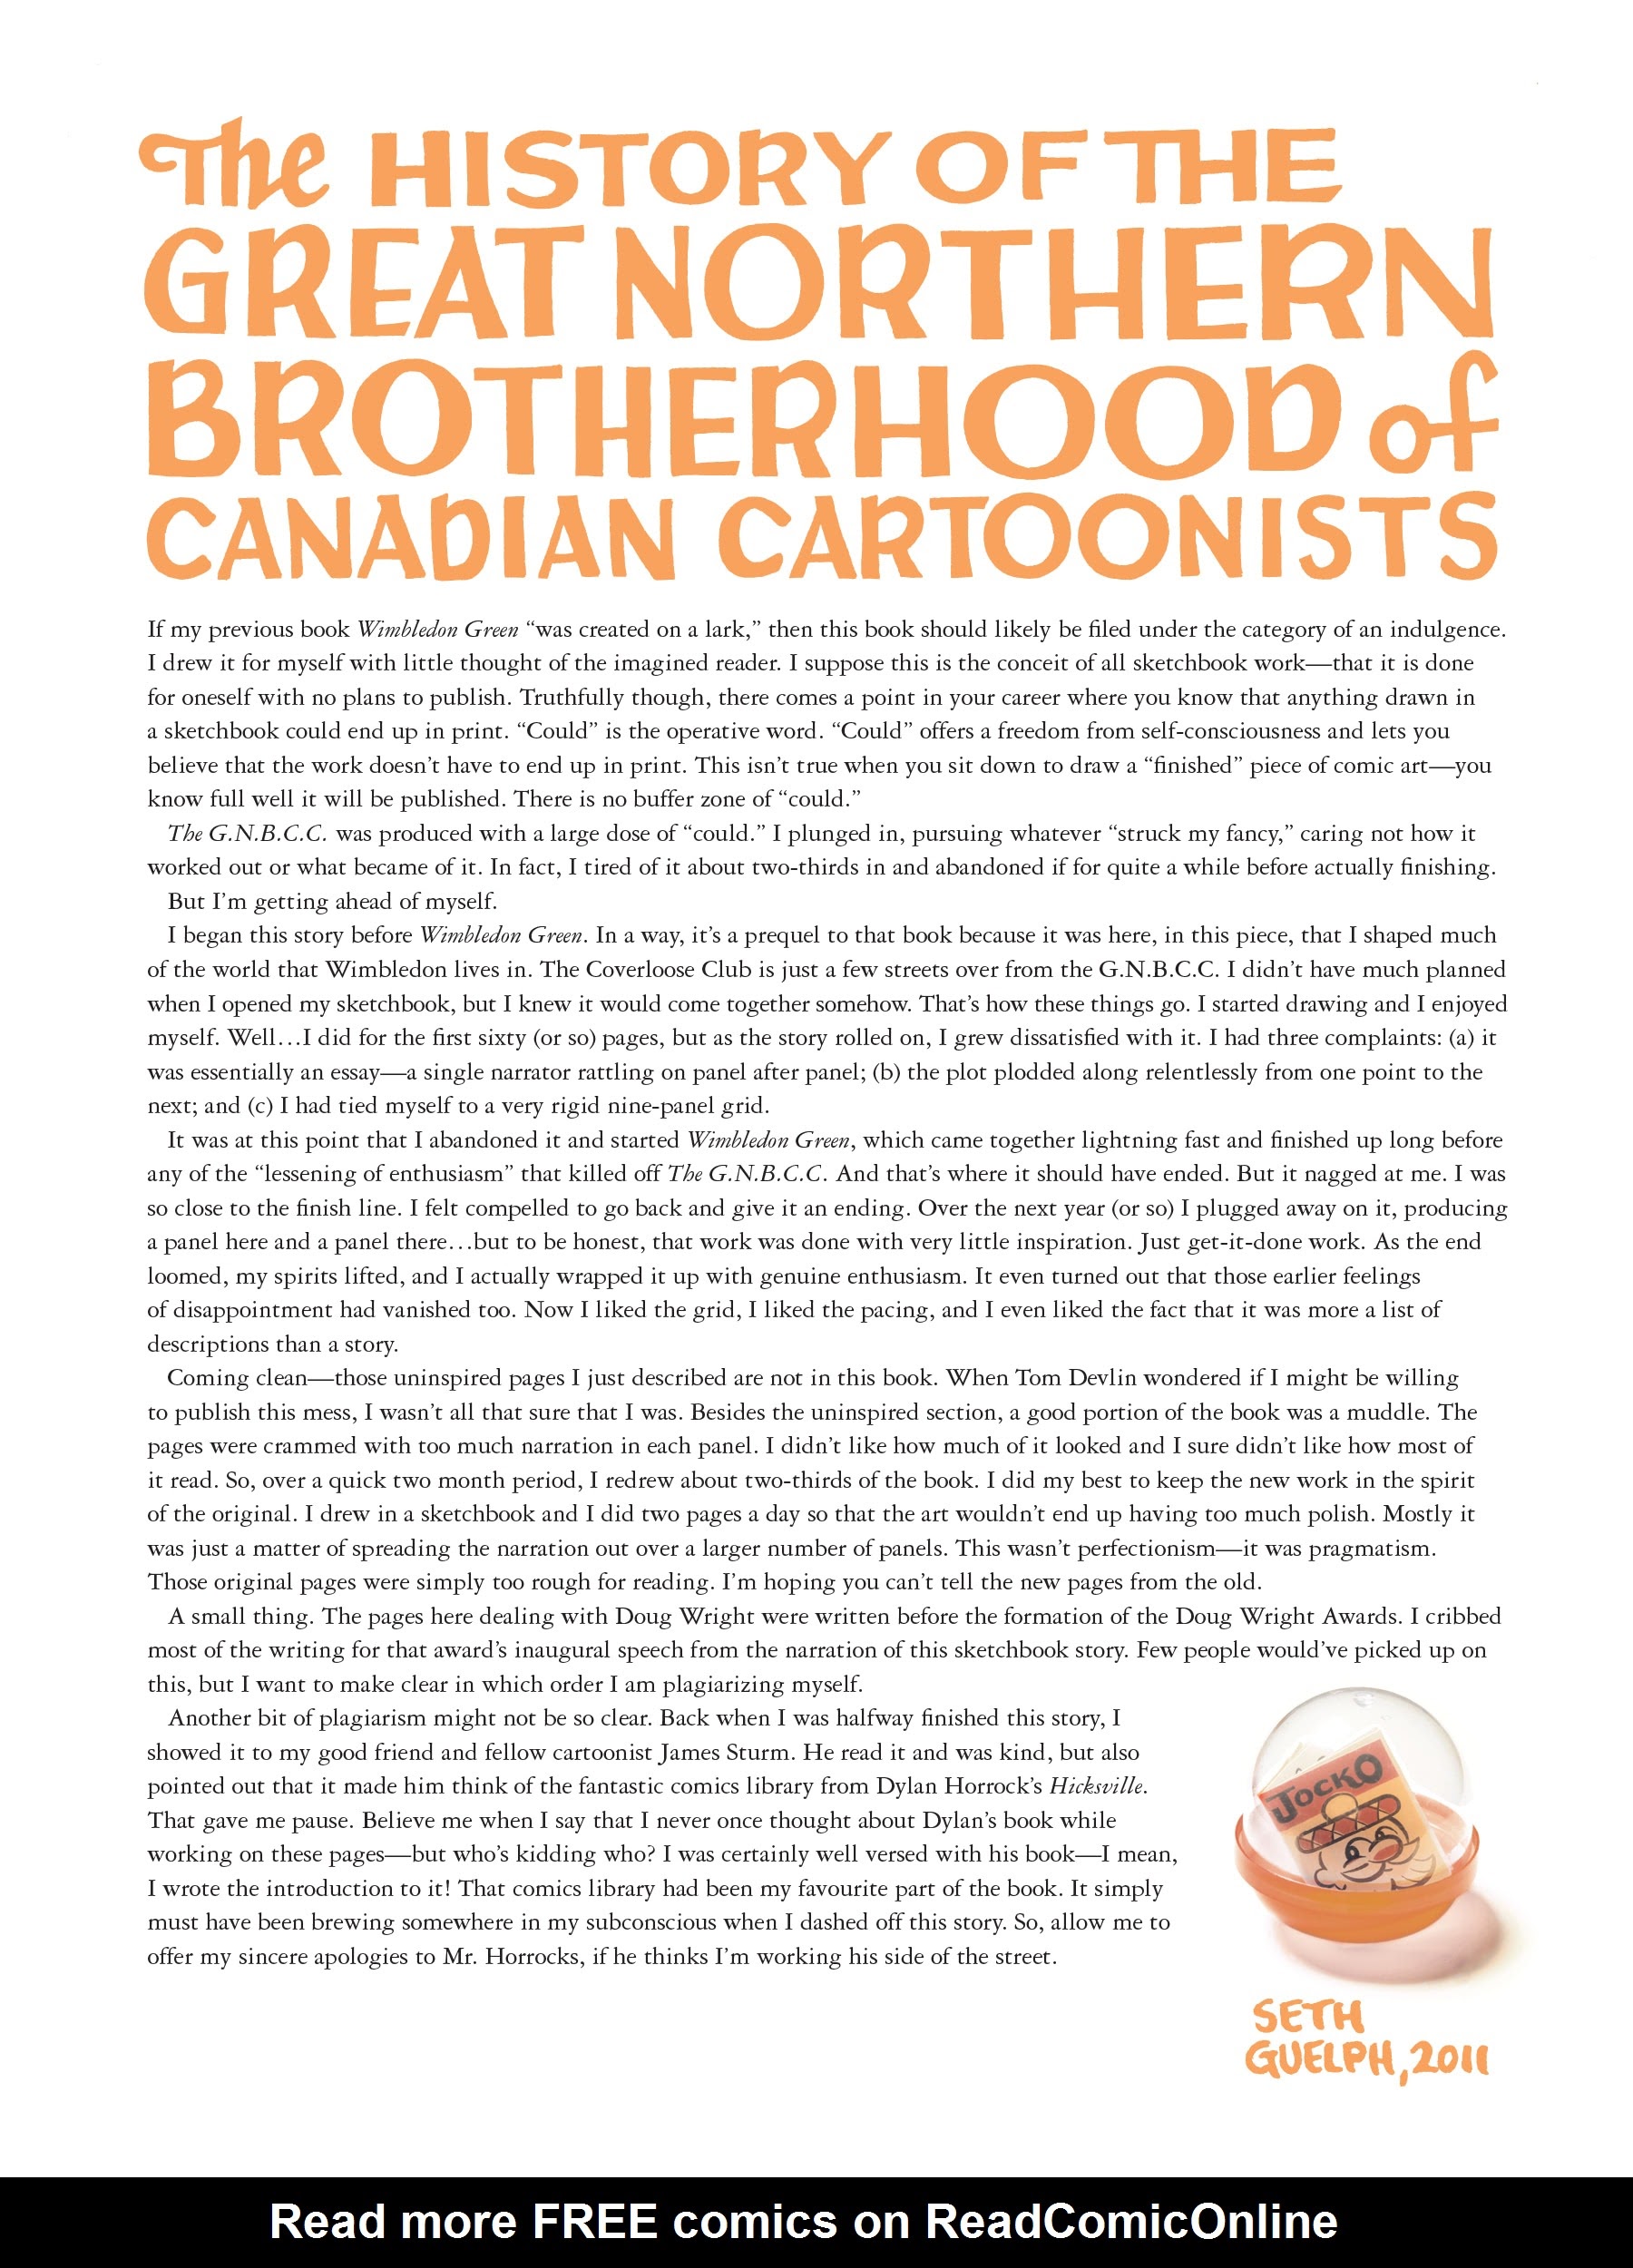 Read online Great Northern Brotherhood of Canadian Cartoonists comic -  Issue # TPB - 12